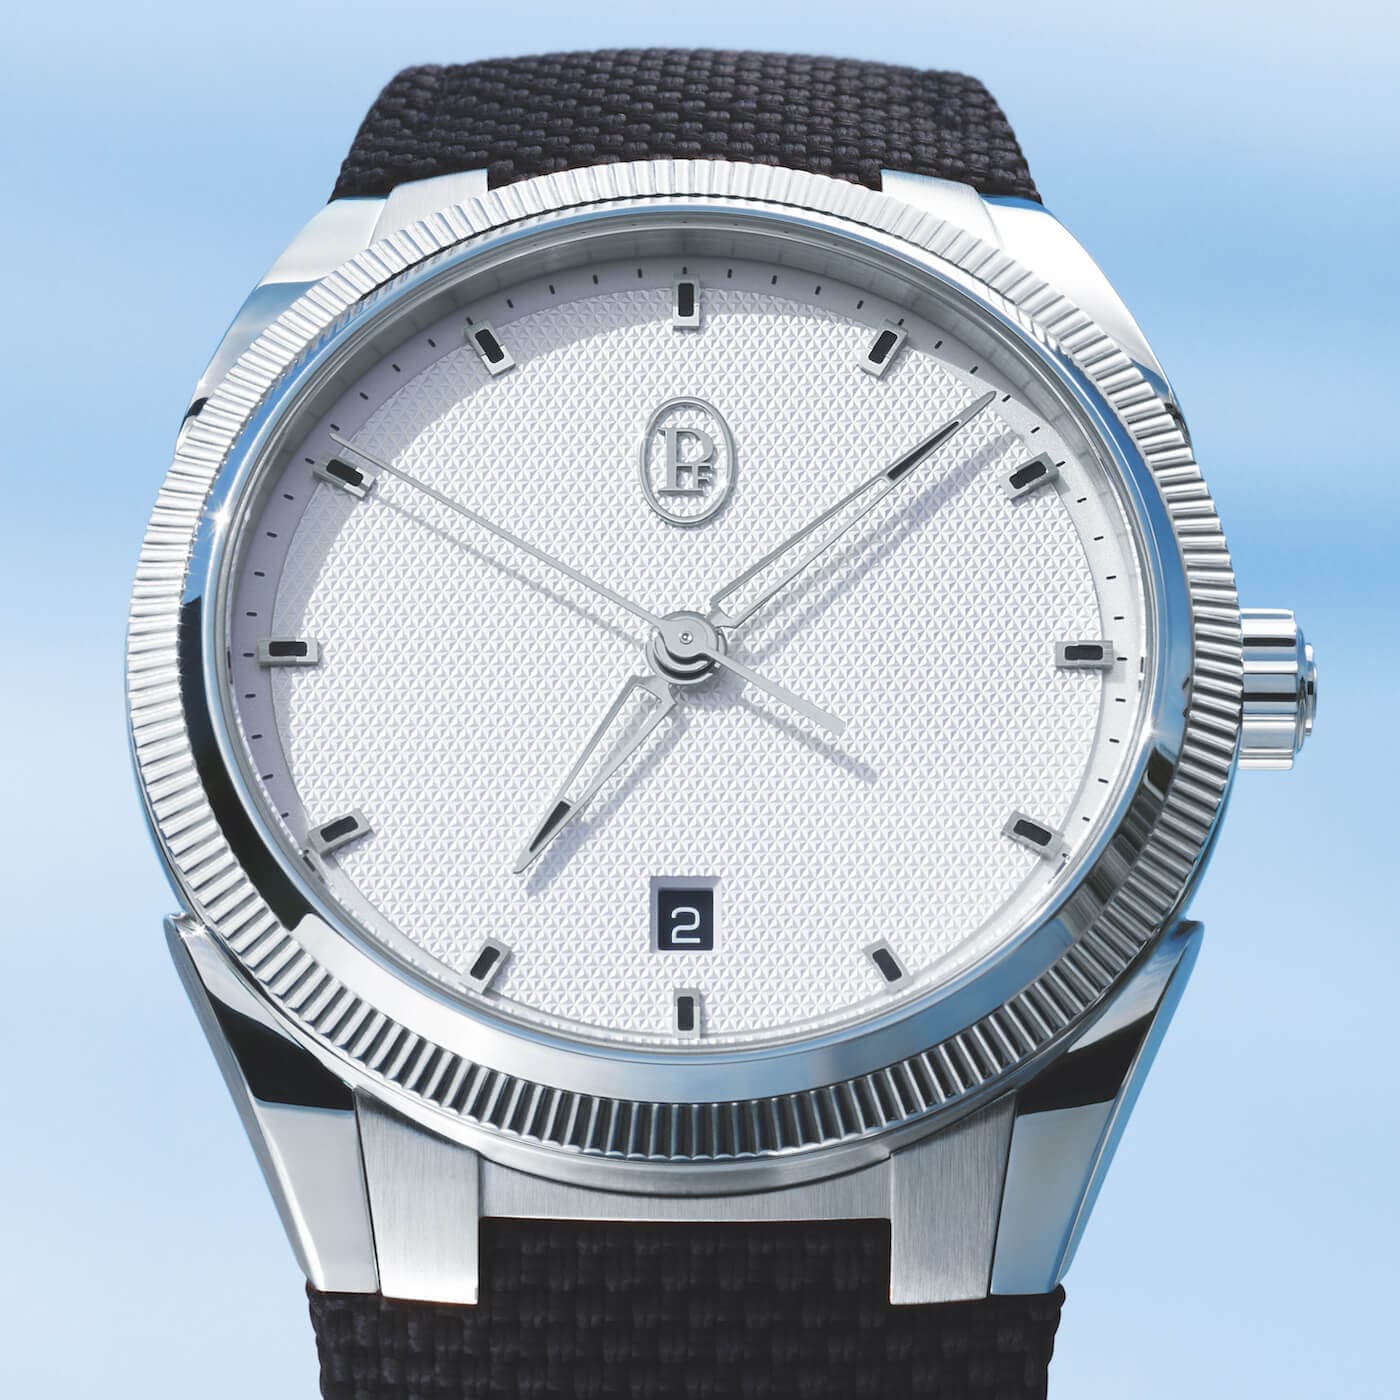 New Parmigiani Fleurier Tonda PF Sport collection brings a subtly sporty touch to the hit lineup